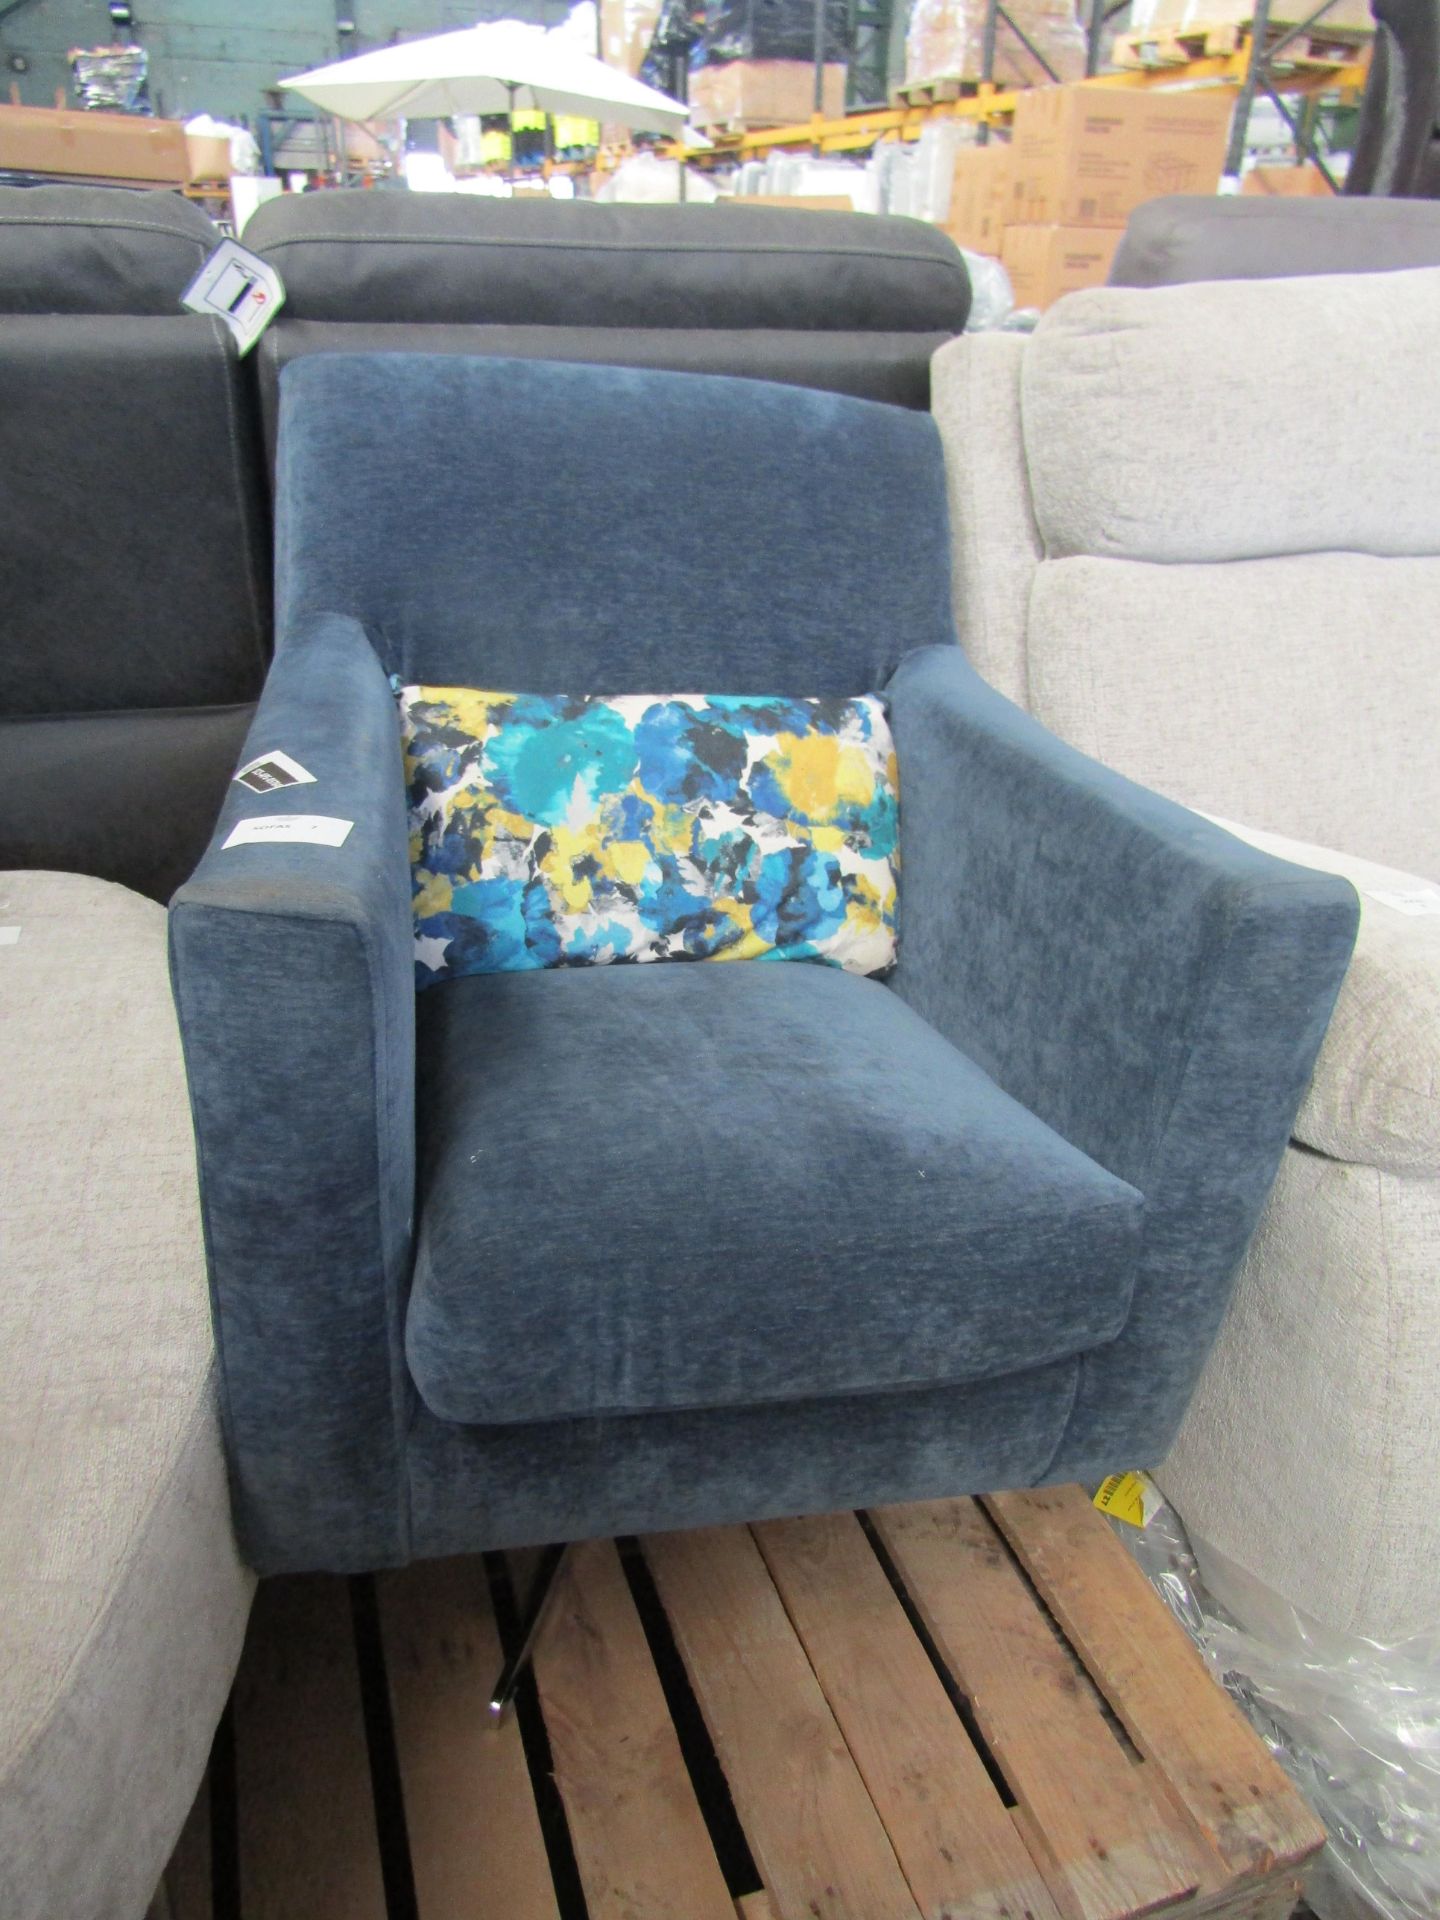 Sociable Twister Chair Sociable Navy Chrome Foot Ben02 RRP 590 The Sociable sofa collection would - Image 2 of 2